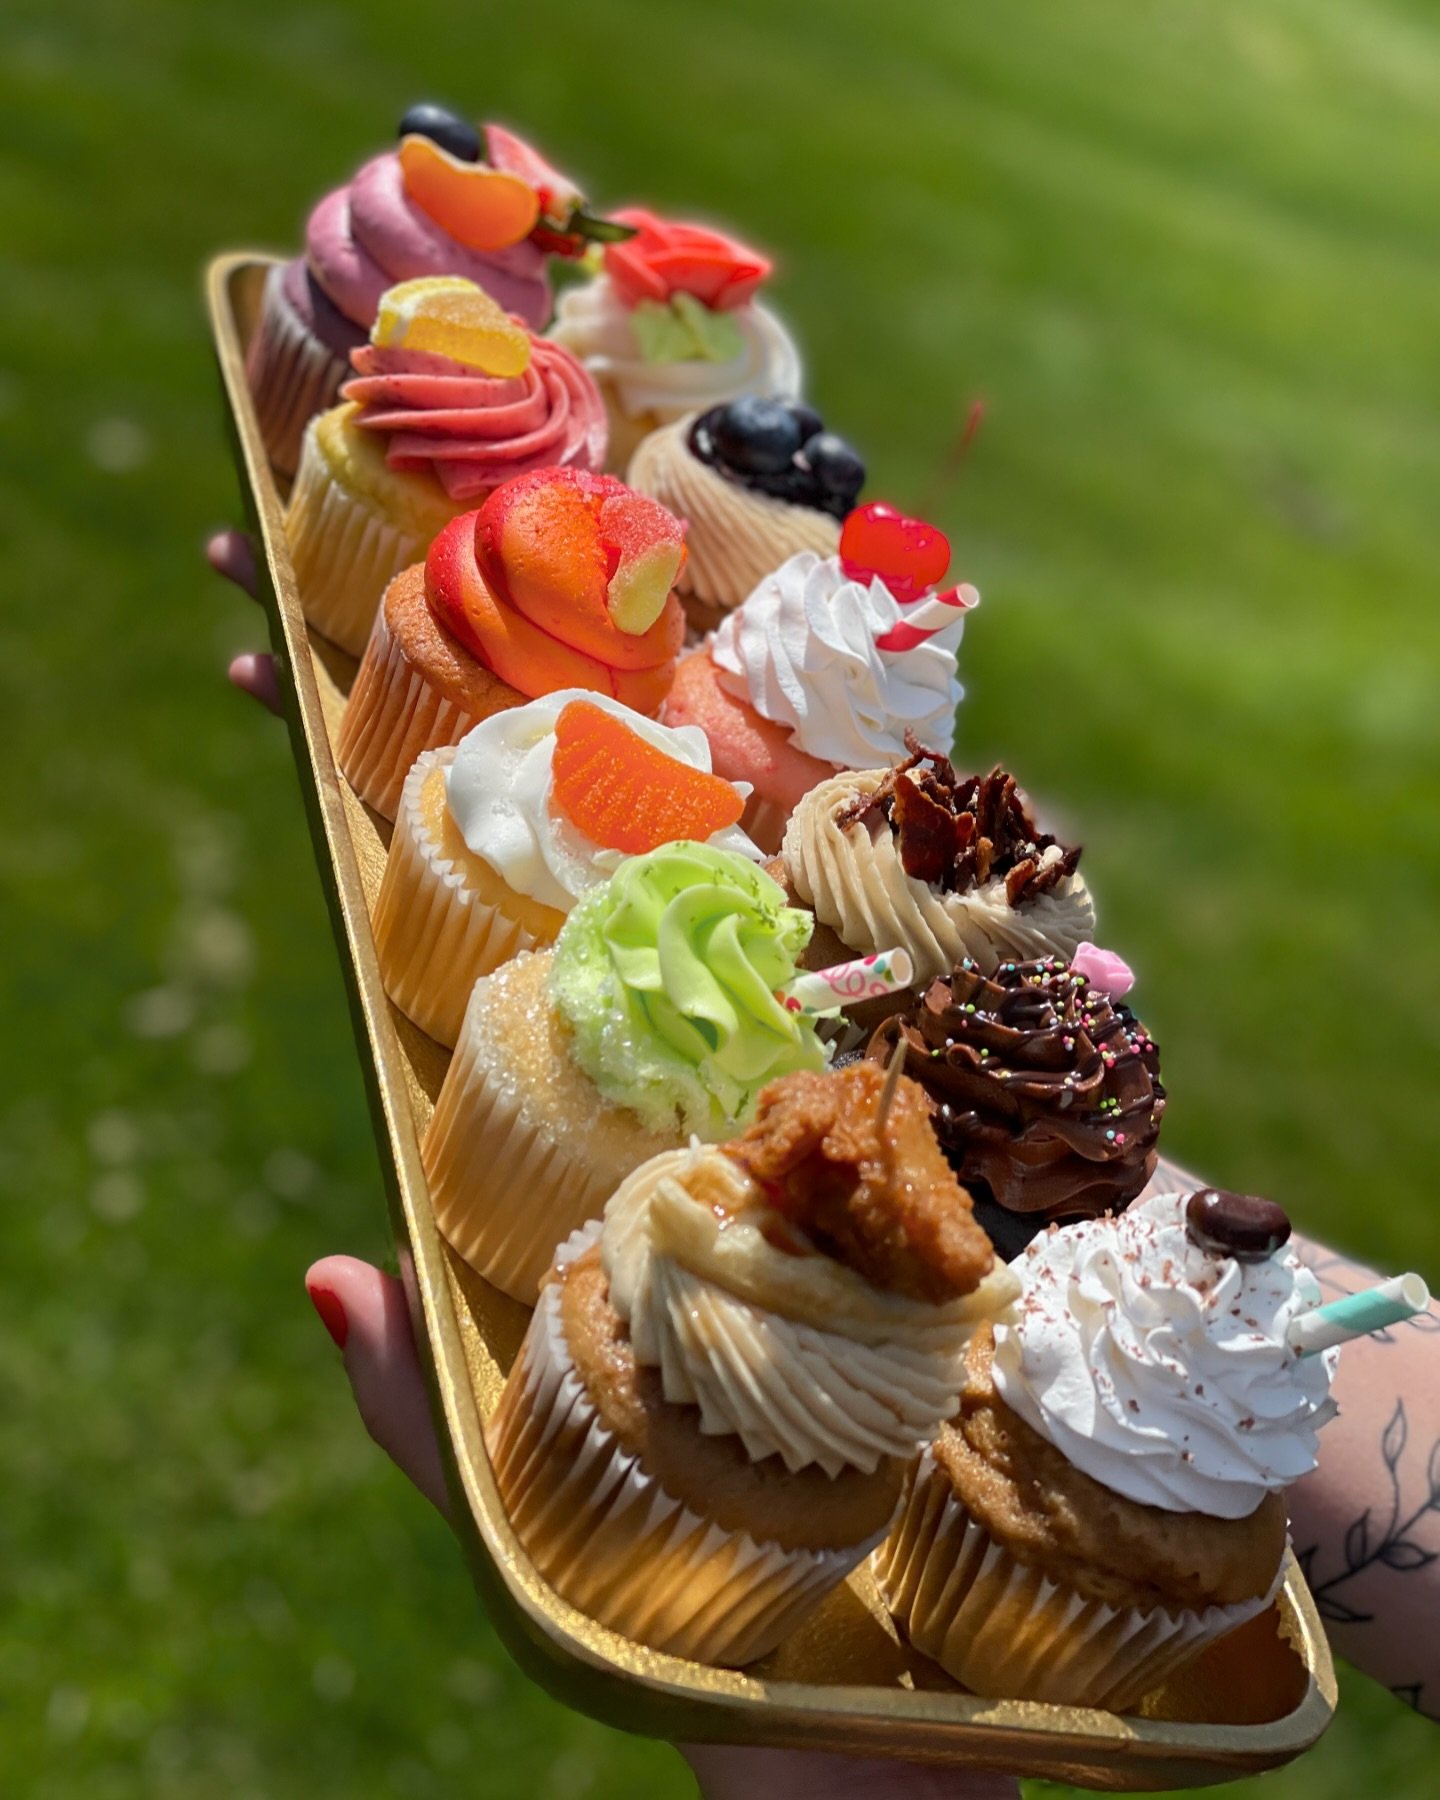 Mom&rsquo;s Brunch Cupcake Packs are available for pre-order! 

Our flavors include Sangria, Margarita, Mom-osa, Peach Bellini, Strawberry Lemon, White Almond, Blueberry Pancake, Strawberry Milkshake, Death by Chocolate, Maple Bacon, Chicken + Waffle